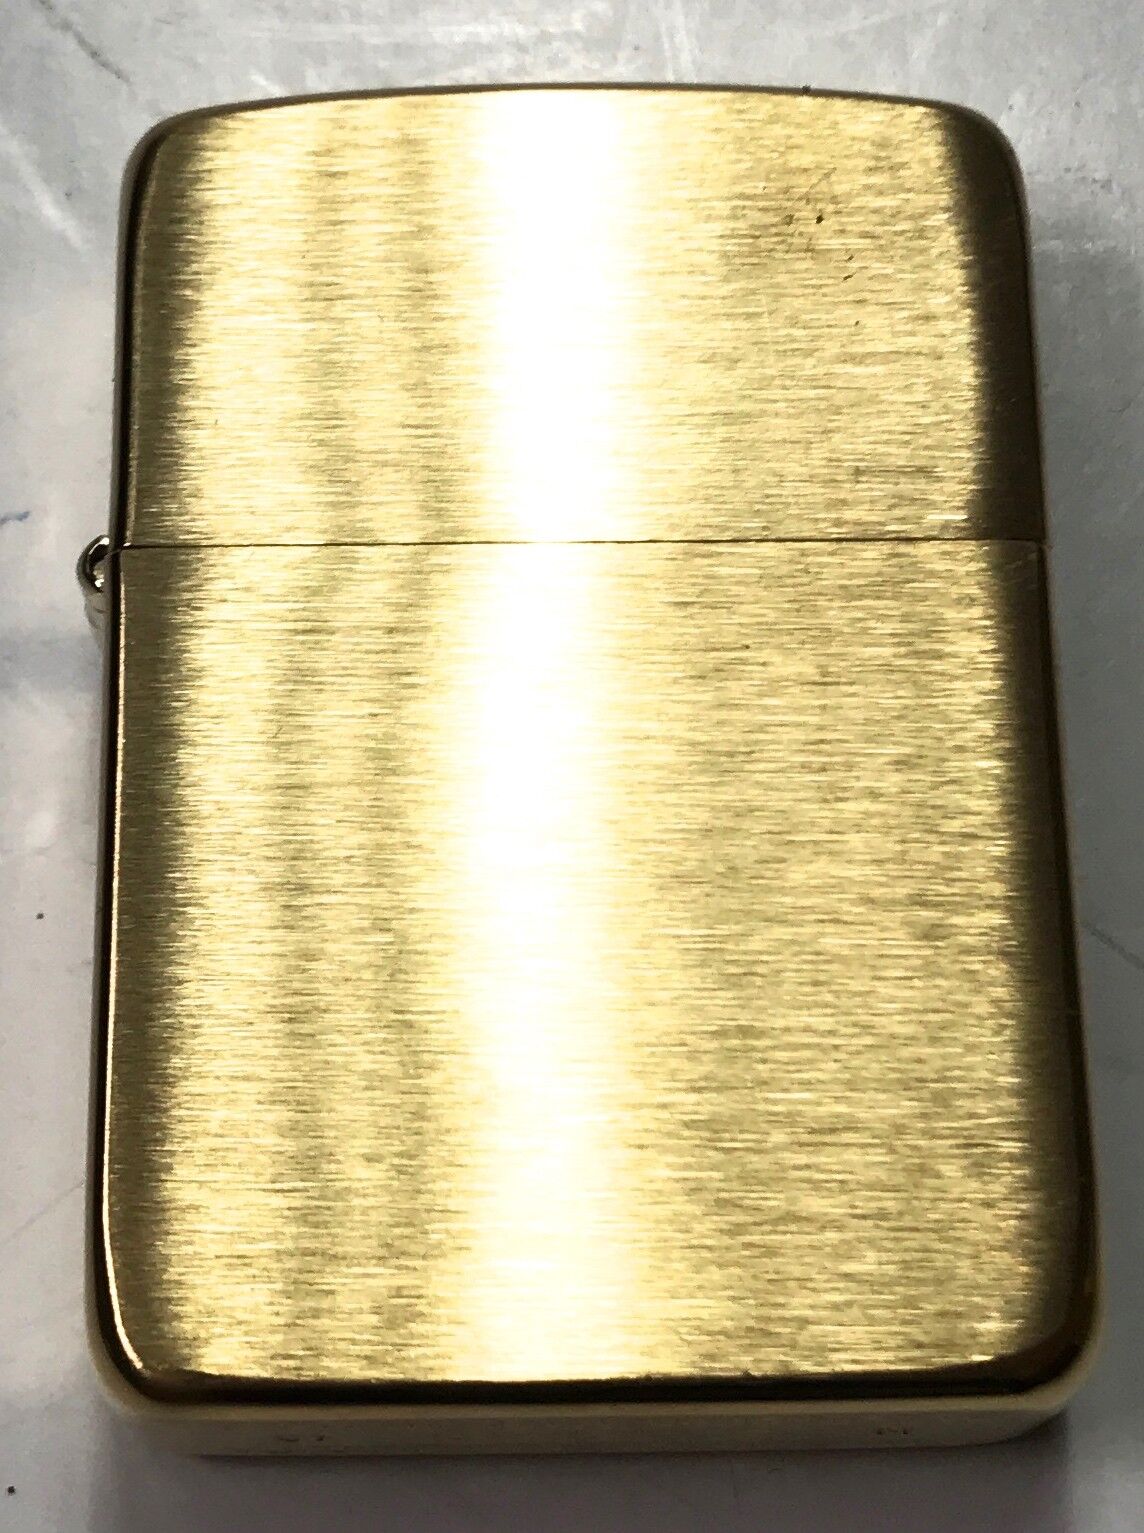 WWII US ARMY GI PERSONAL ITEMS ZIPPO CIGARETTE LIGHTER-1941 BRASS STYLE